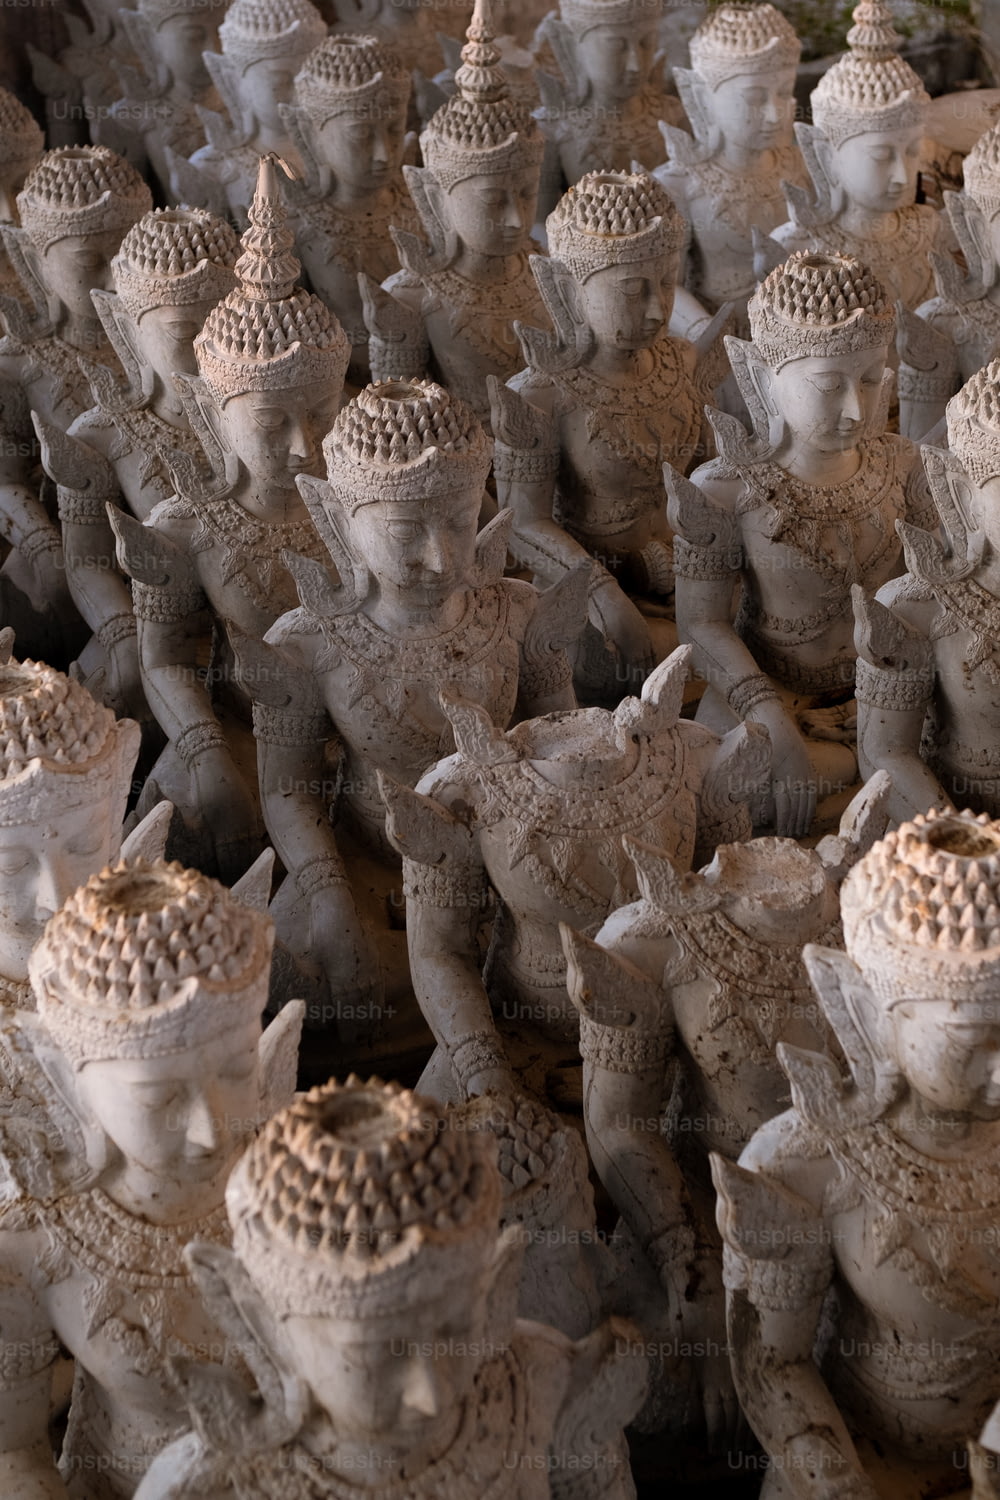 a large group of statues of elephants and men